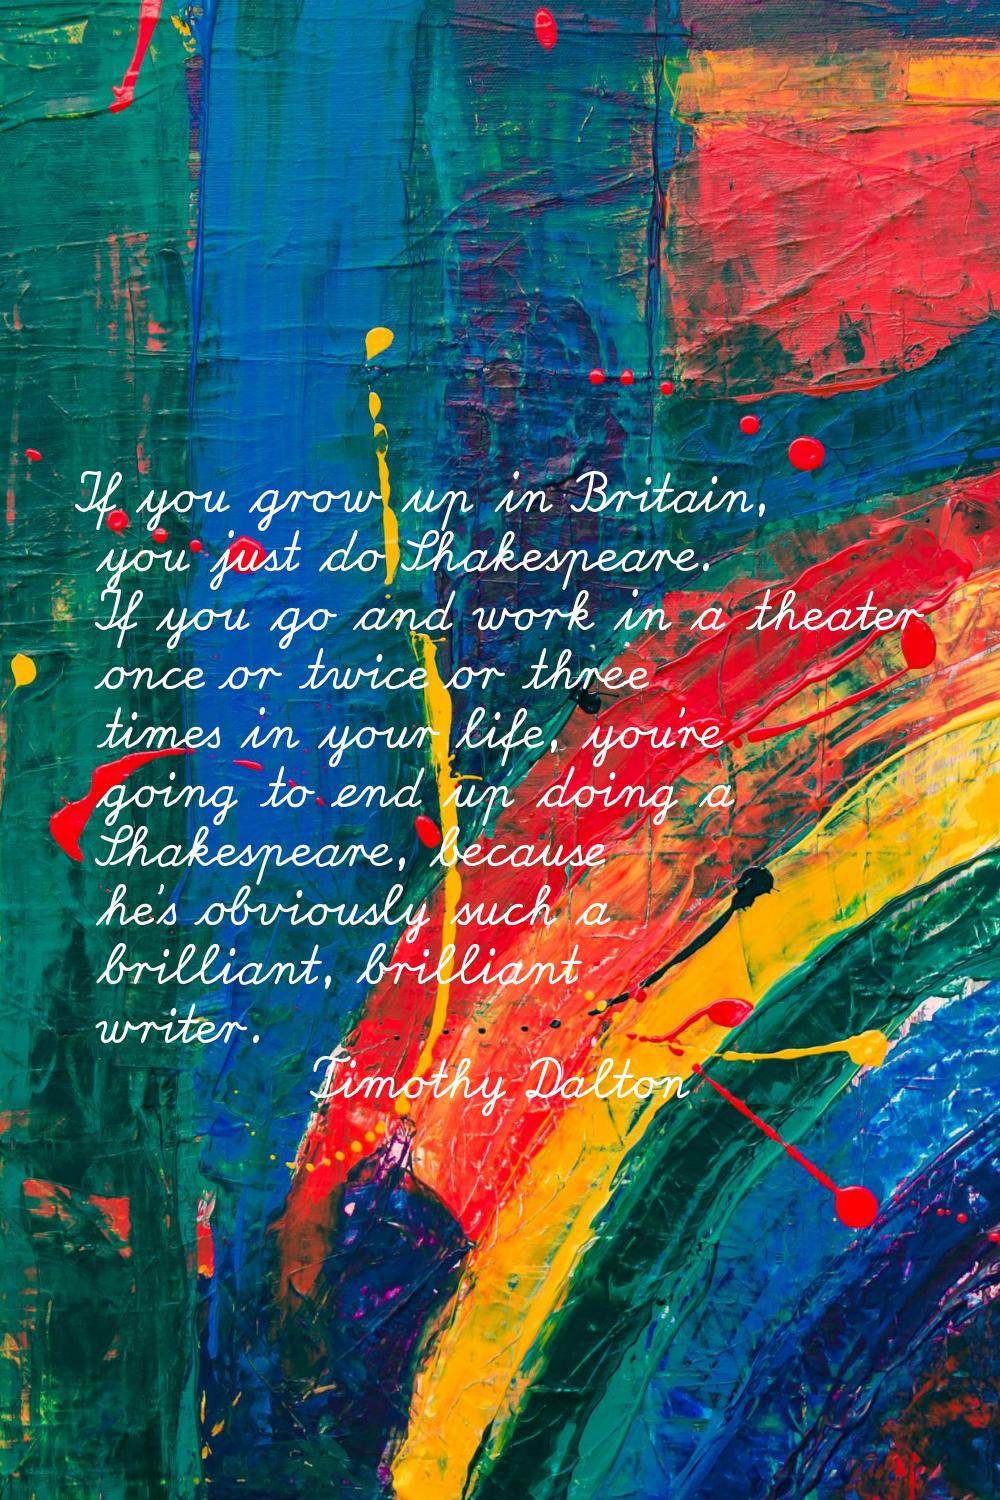 If you grow up in Britain, you just do Shakespeare. If you go and work in a theater once or twice o